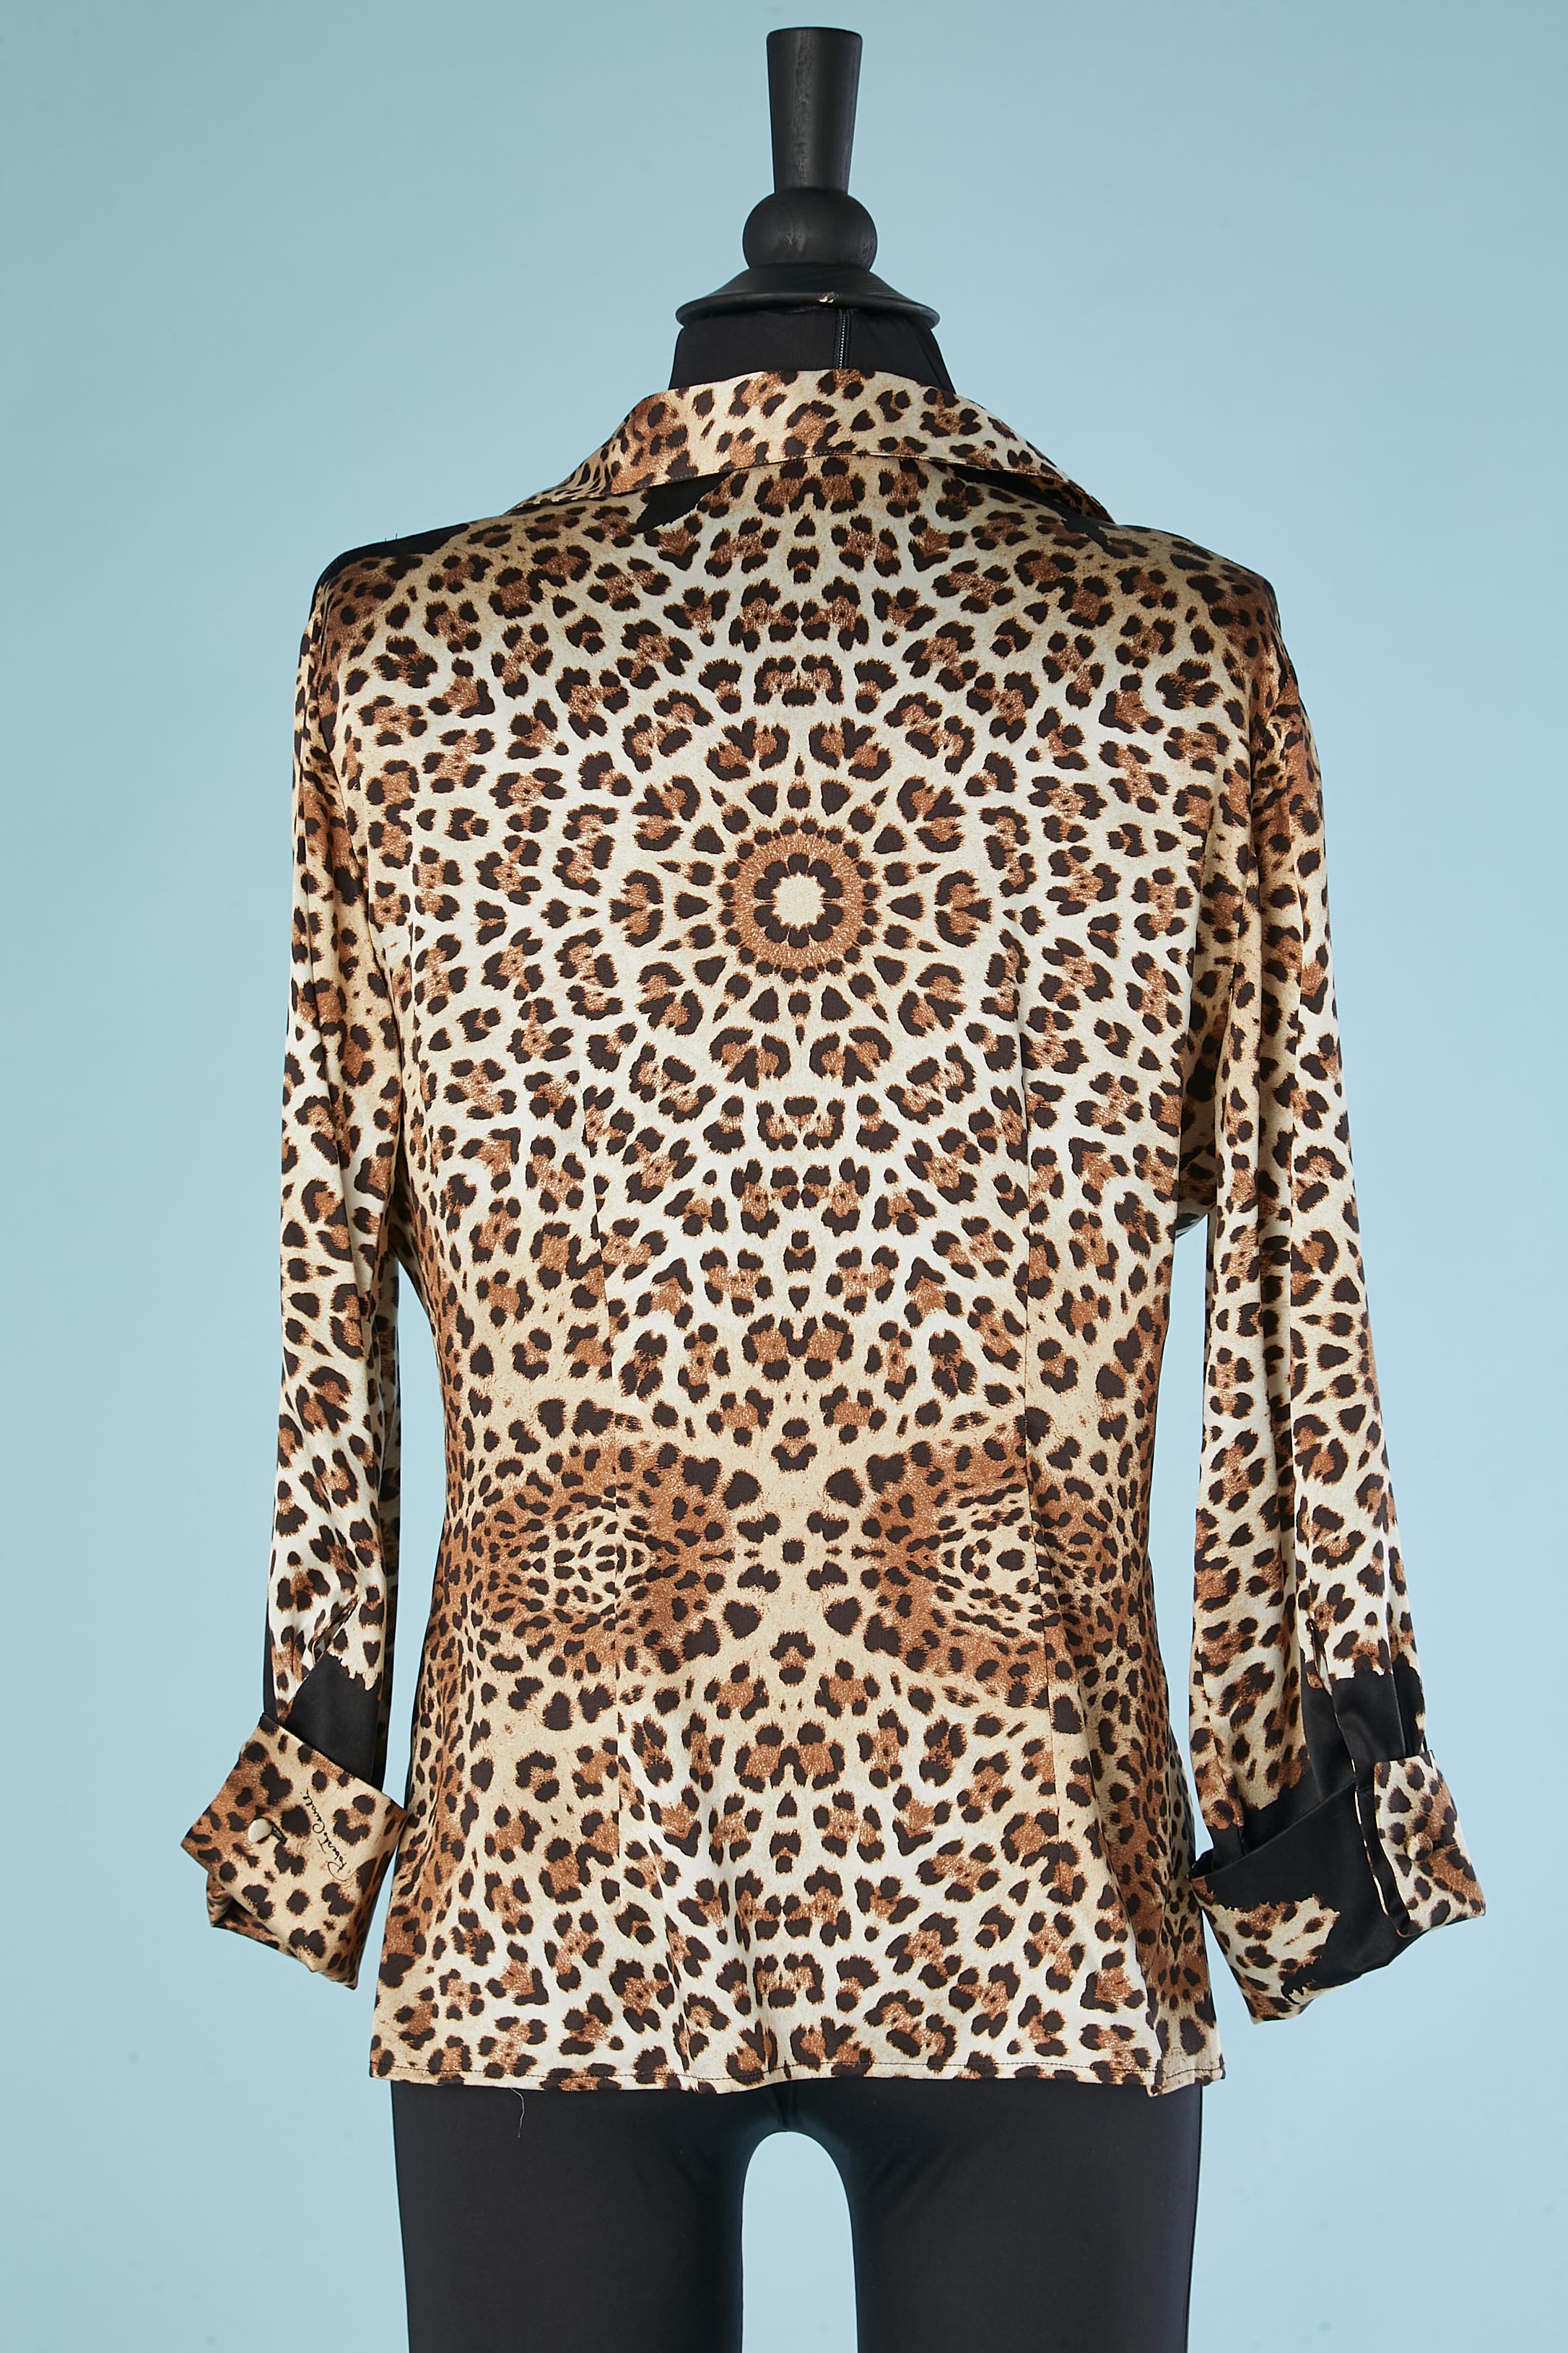 Silk leopard shirt with rhinestone brooch in the middle front Roberto Cavalli  For Sale 1